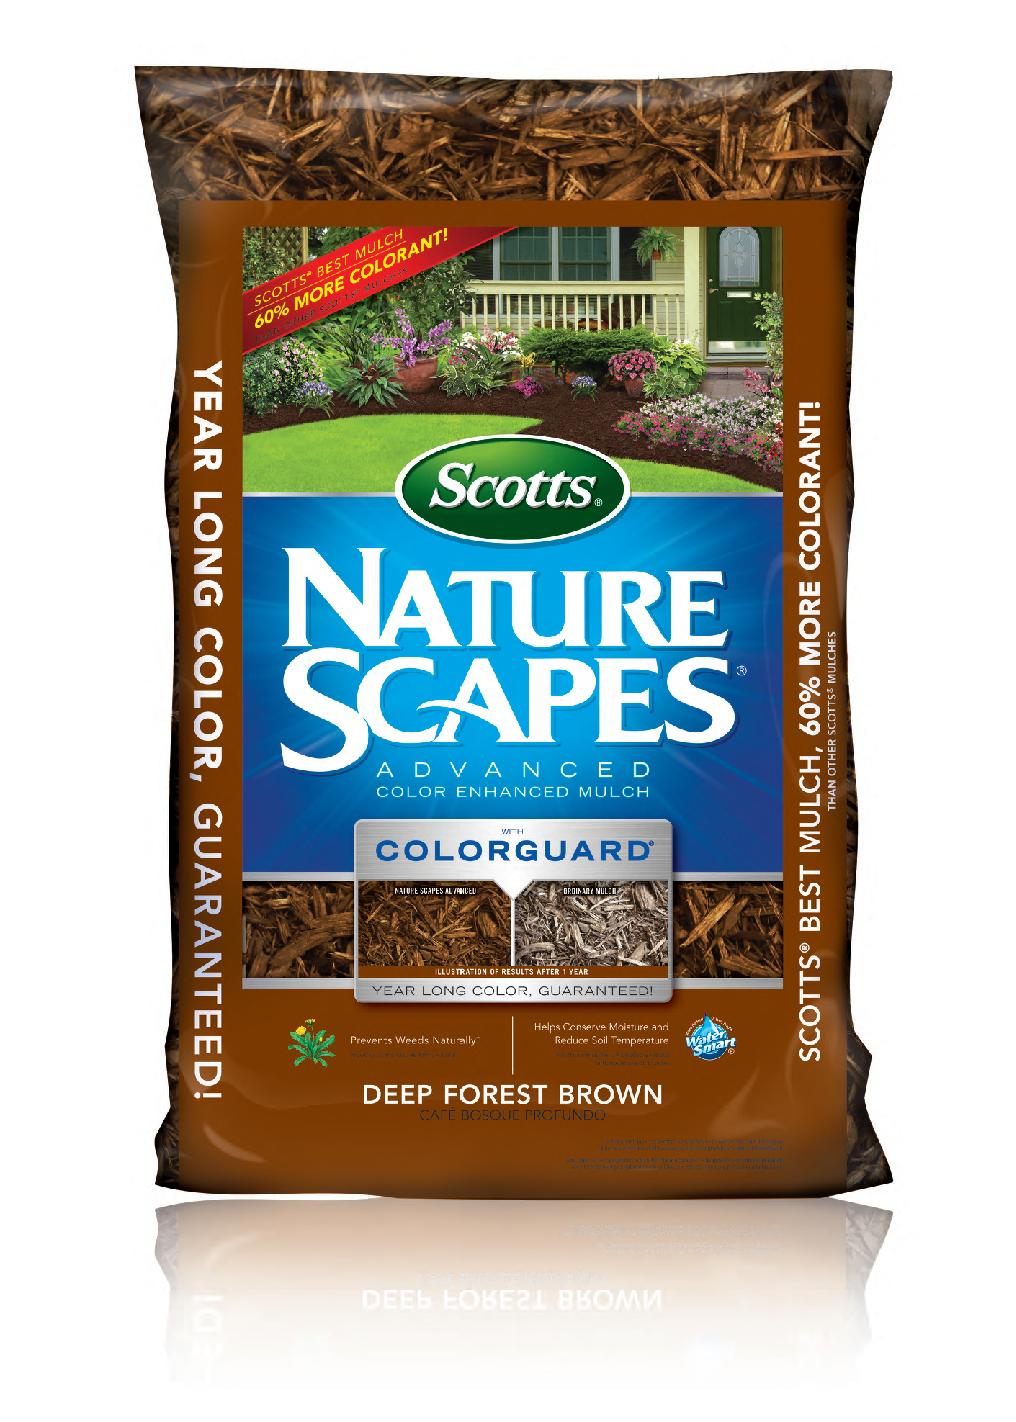 Image of Scotts Nature Scapes mulch dark brown